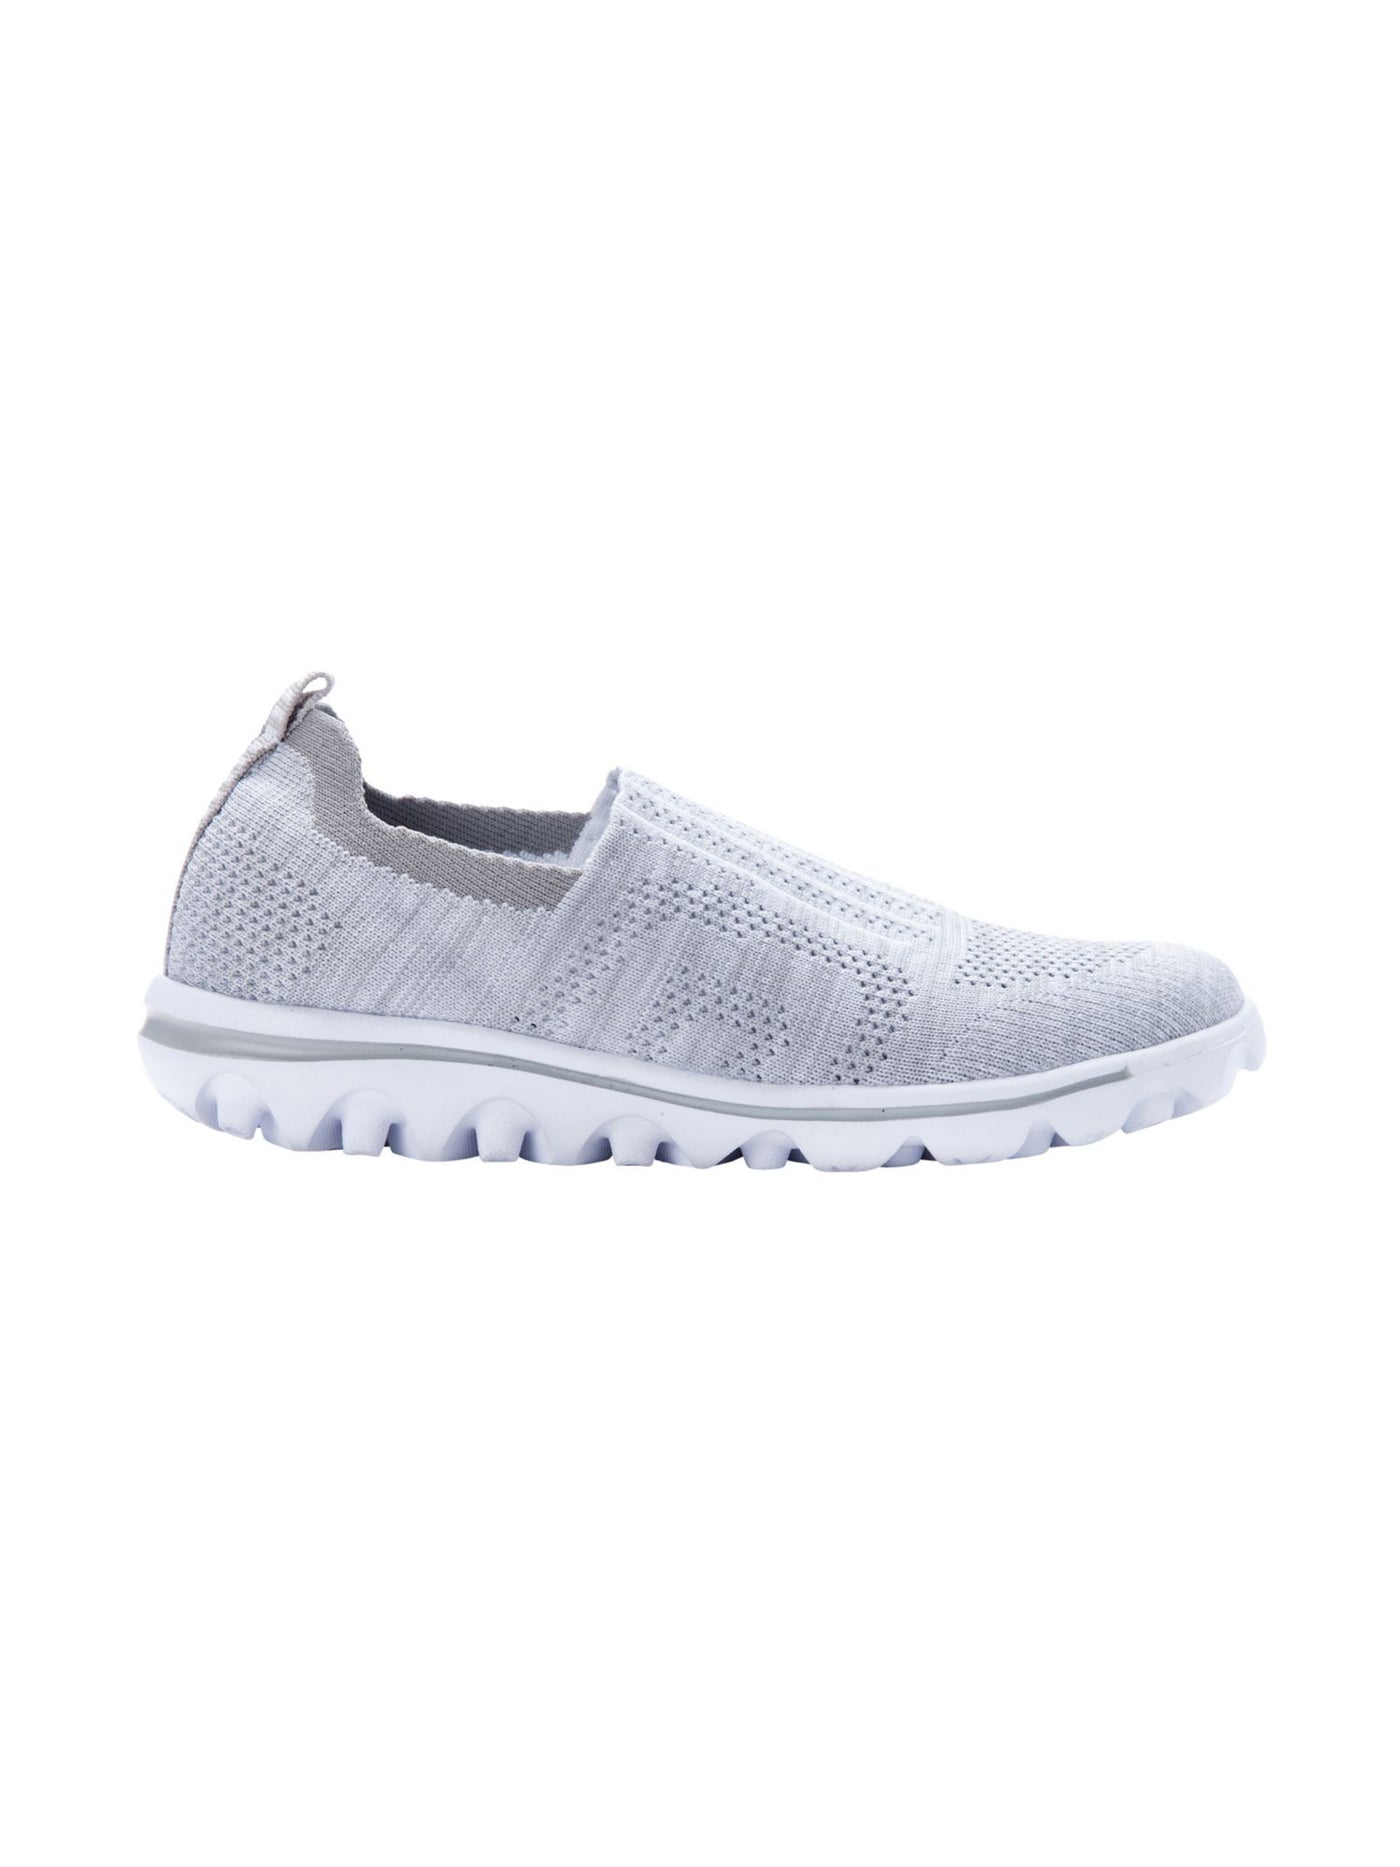 PROPET Womens Gray Mixed Knit Cushioned Travelactiv Stretch Round Toe Wedge Slip On Sneakers Shoes 11 2E